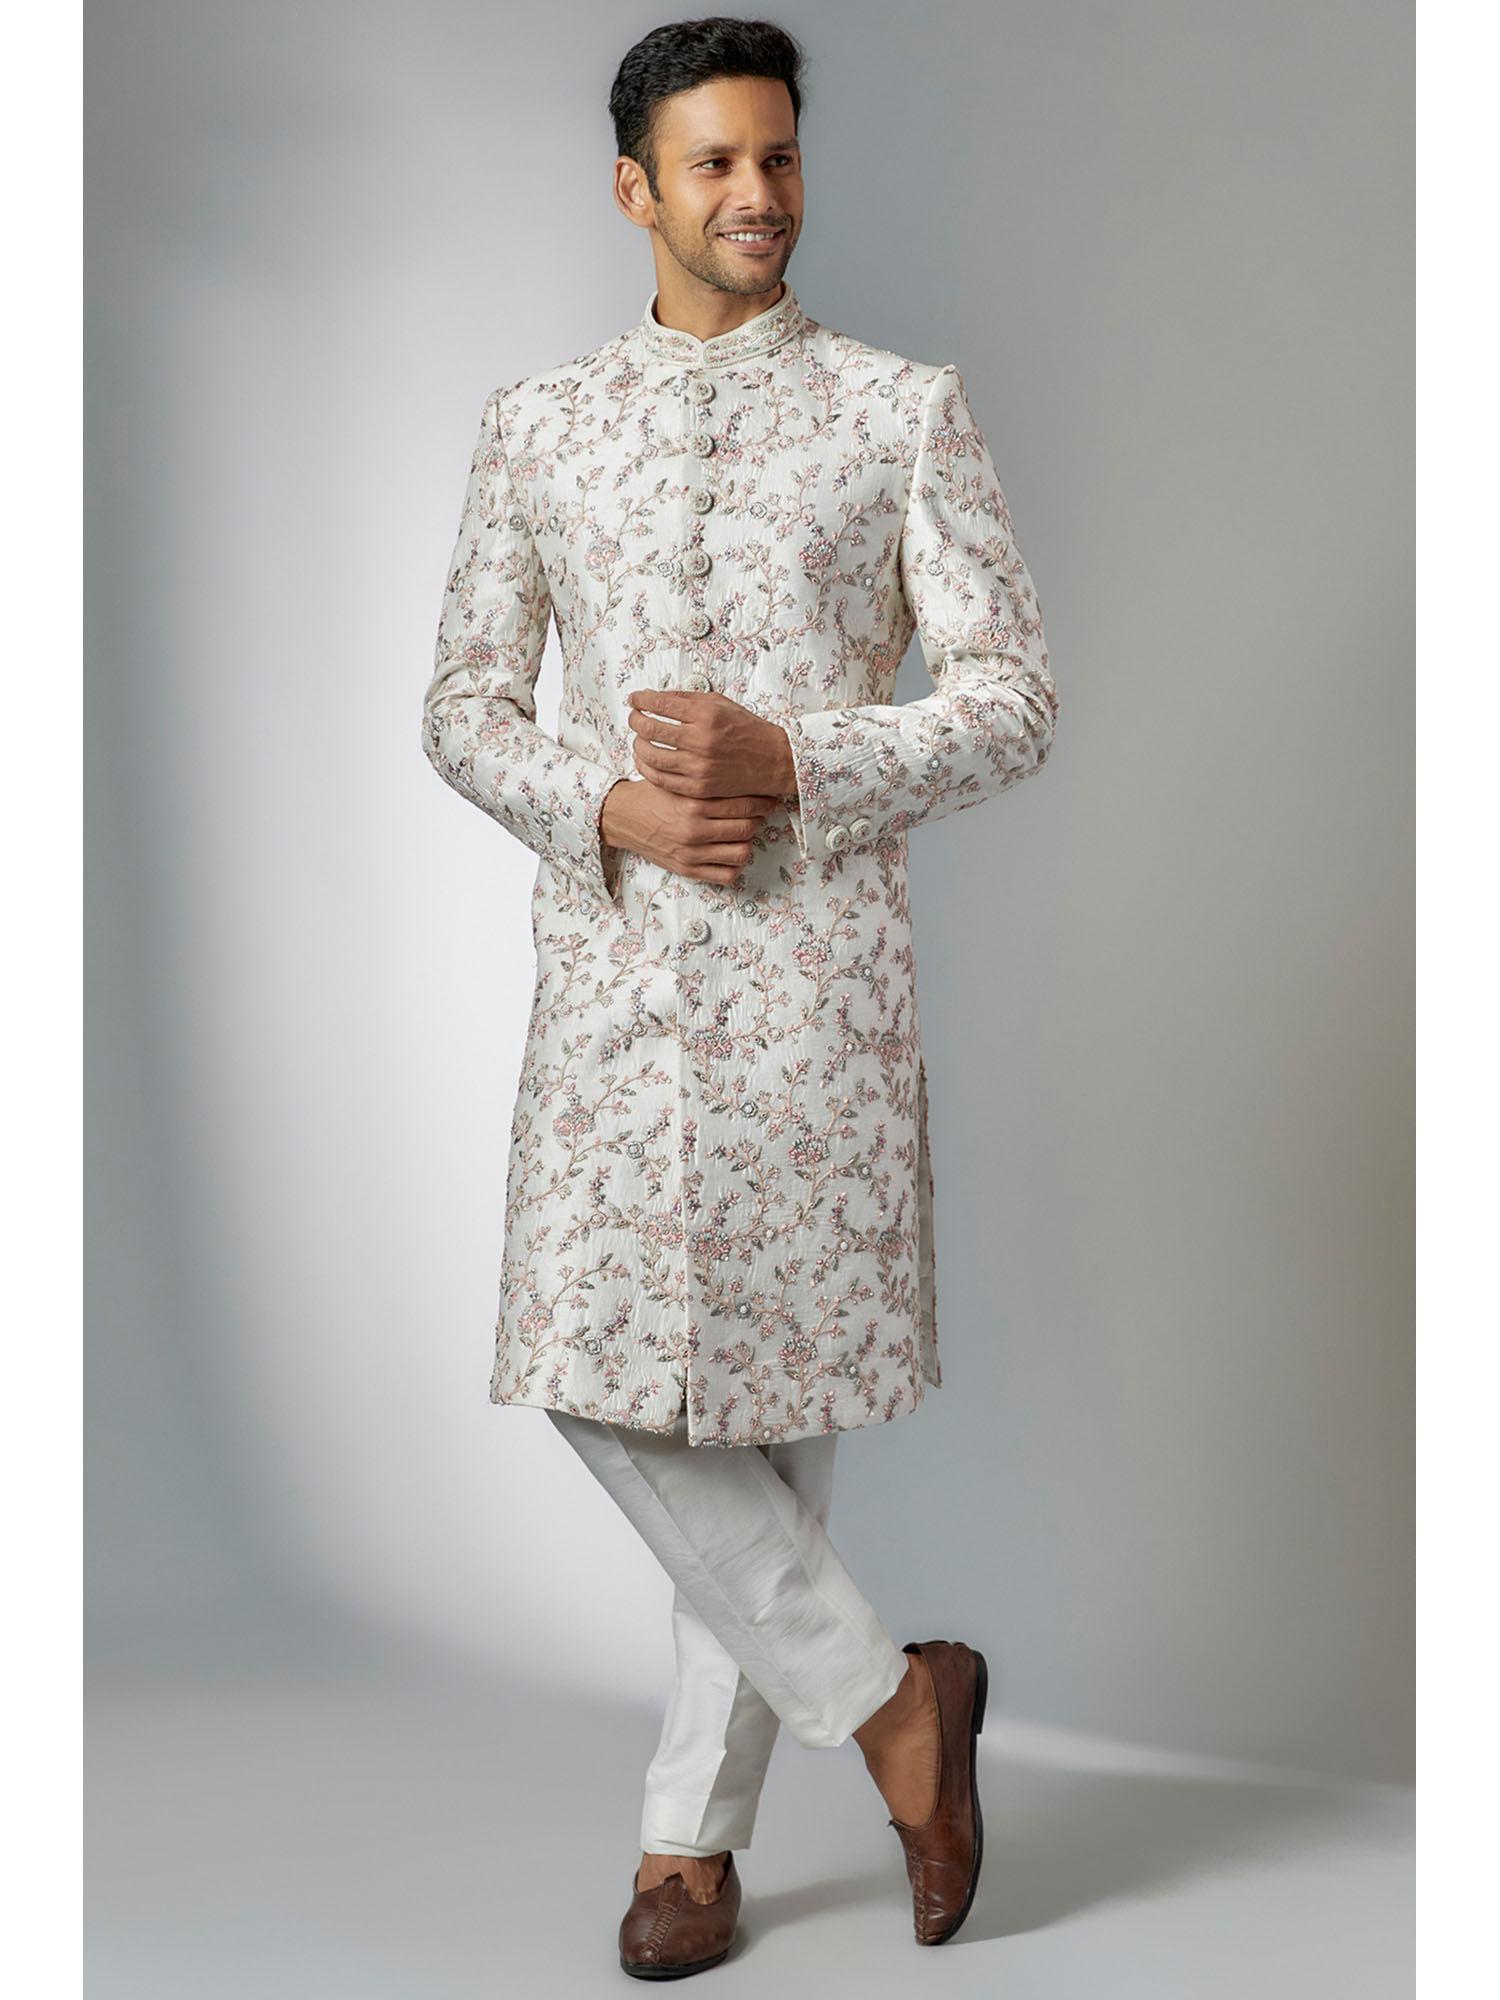 off-white raw silk embroidered sherwani and pant (set of 2)